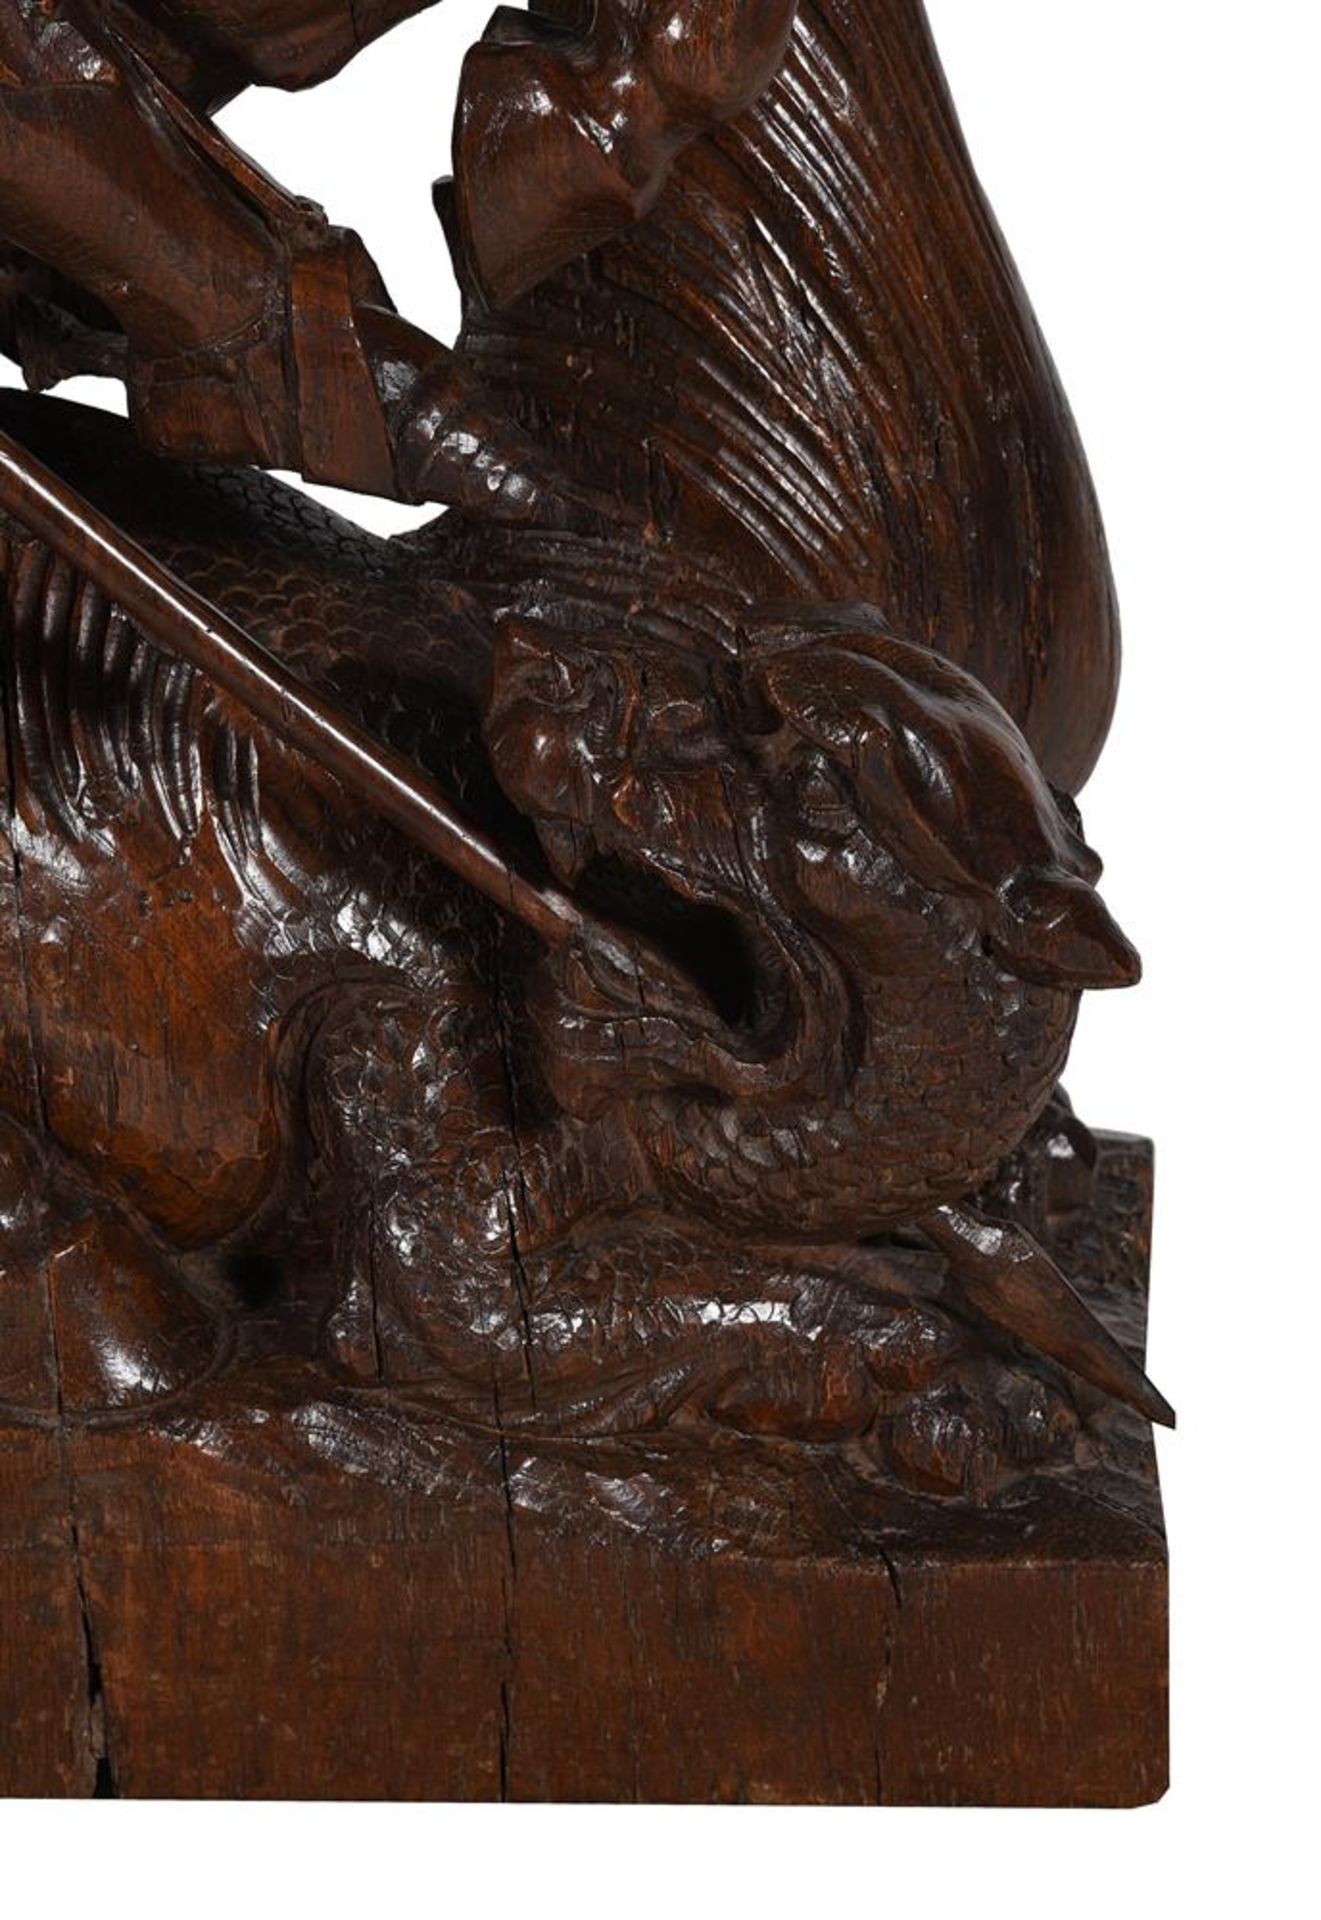 A LARGE CARVED OAK MODEL OF ST. GEORGE AND THE DRAGON, PROBABLY EARLY/MID 19TH CENTURY - Image 5 of 7